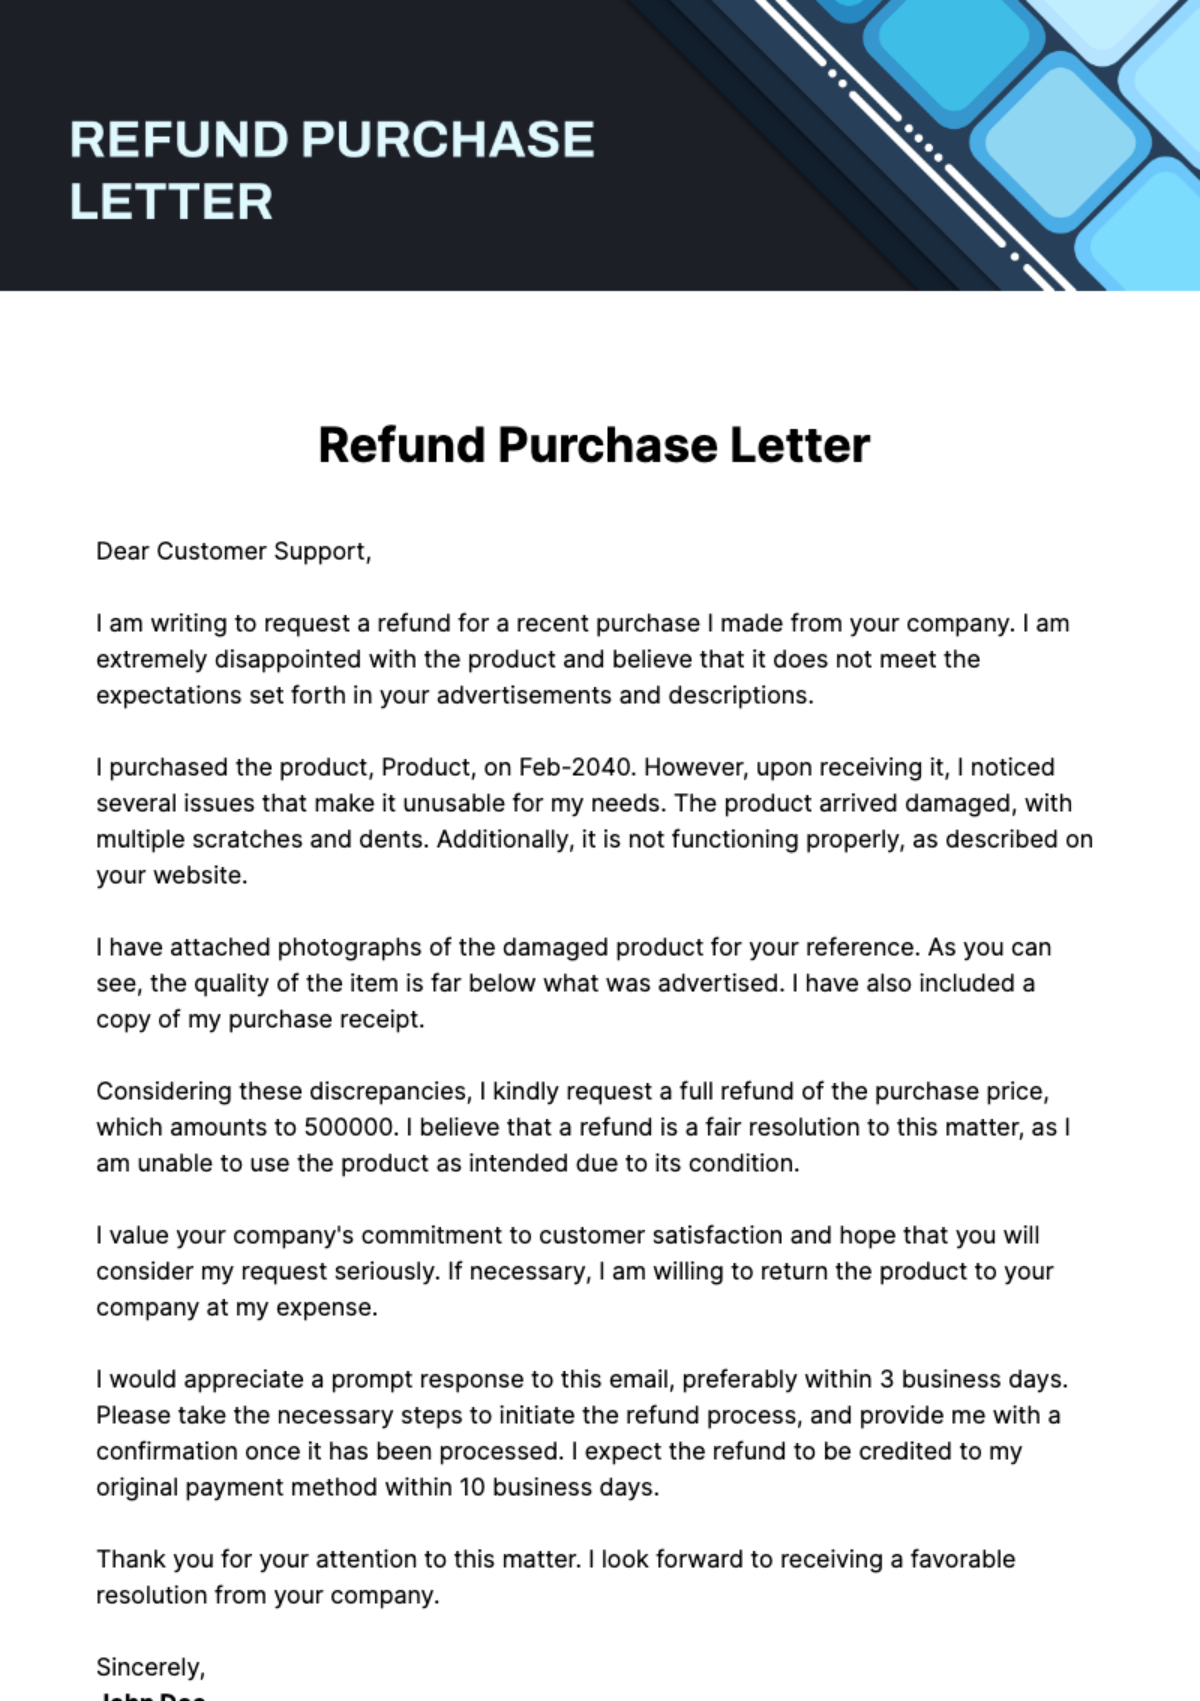 Refund Purchase Letter Template